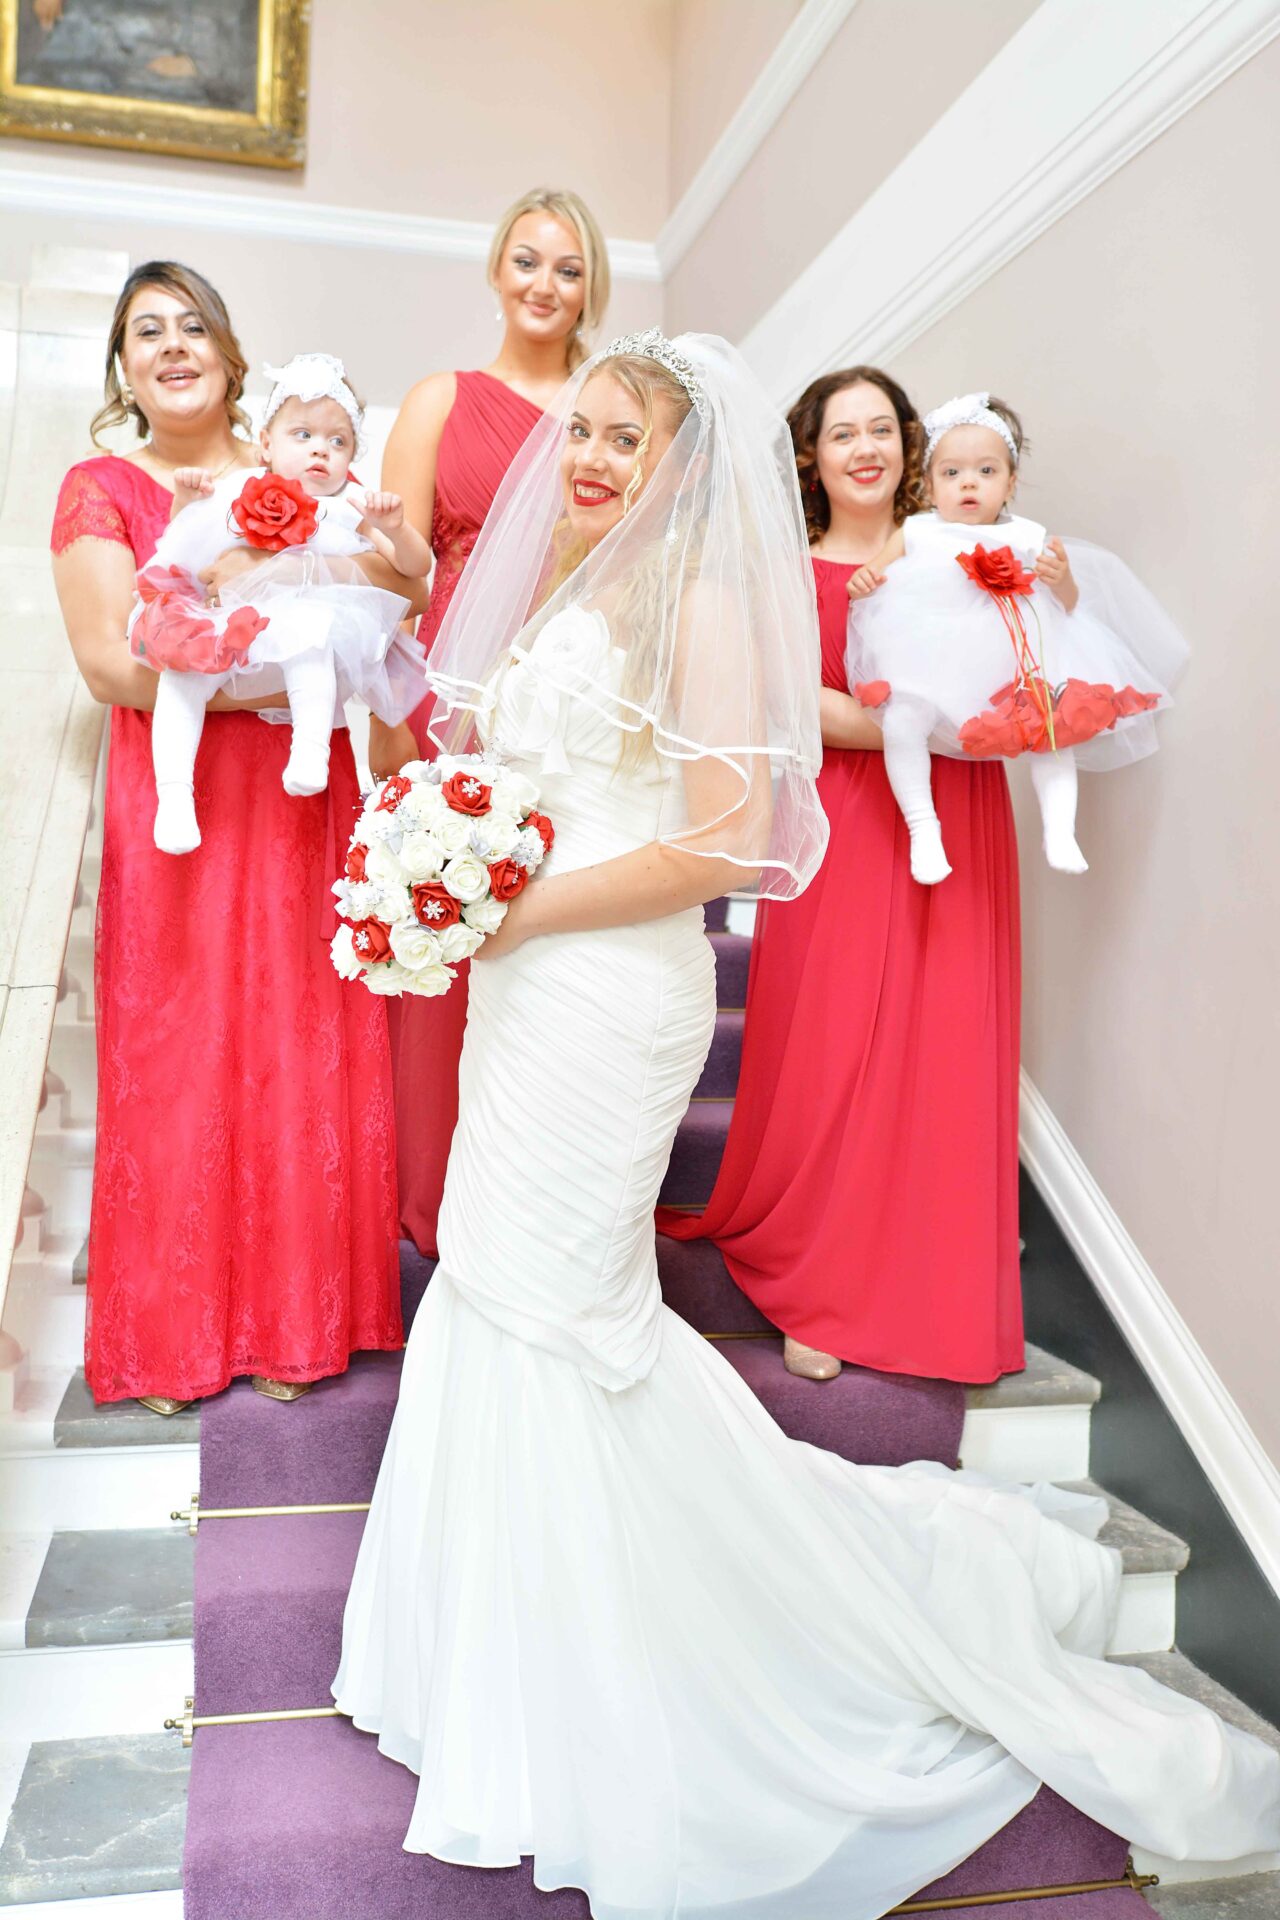 wedding photography at chelsea town hall london